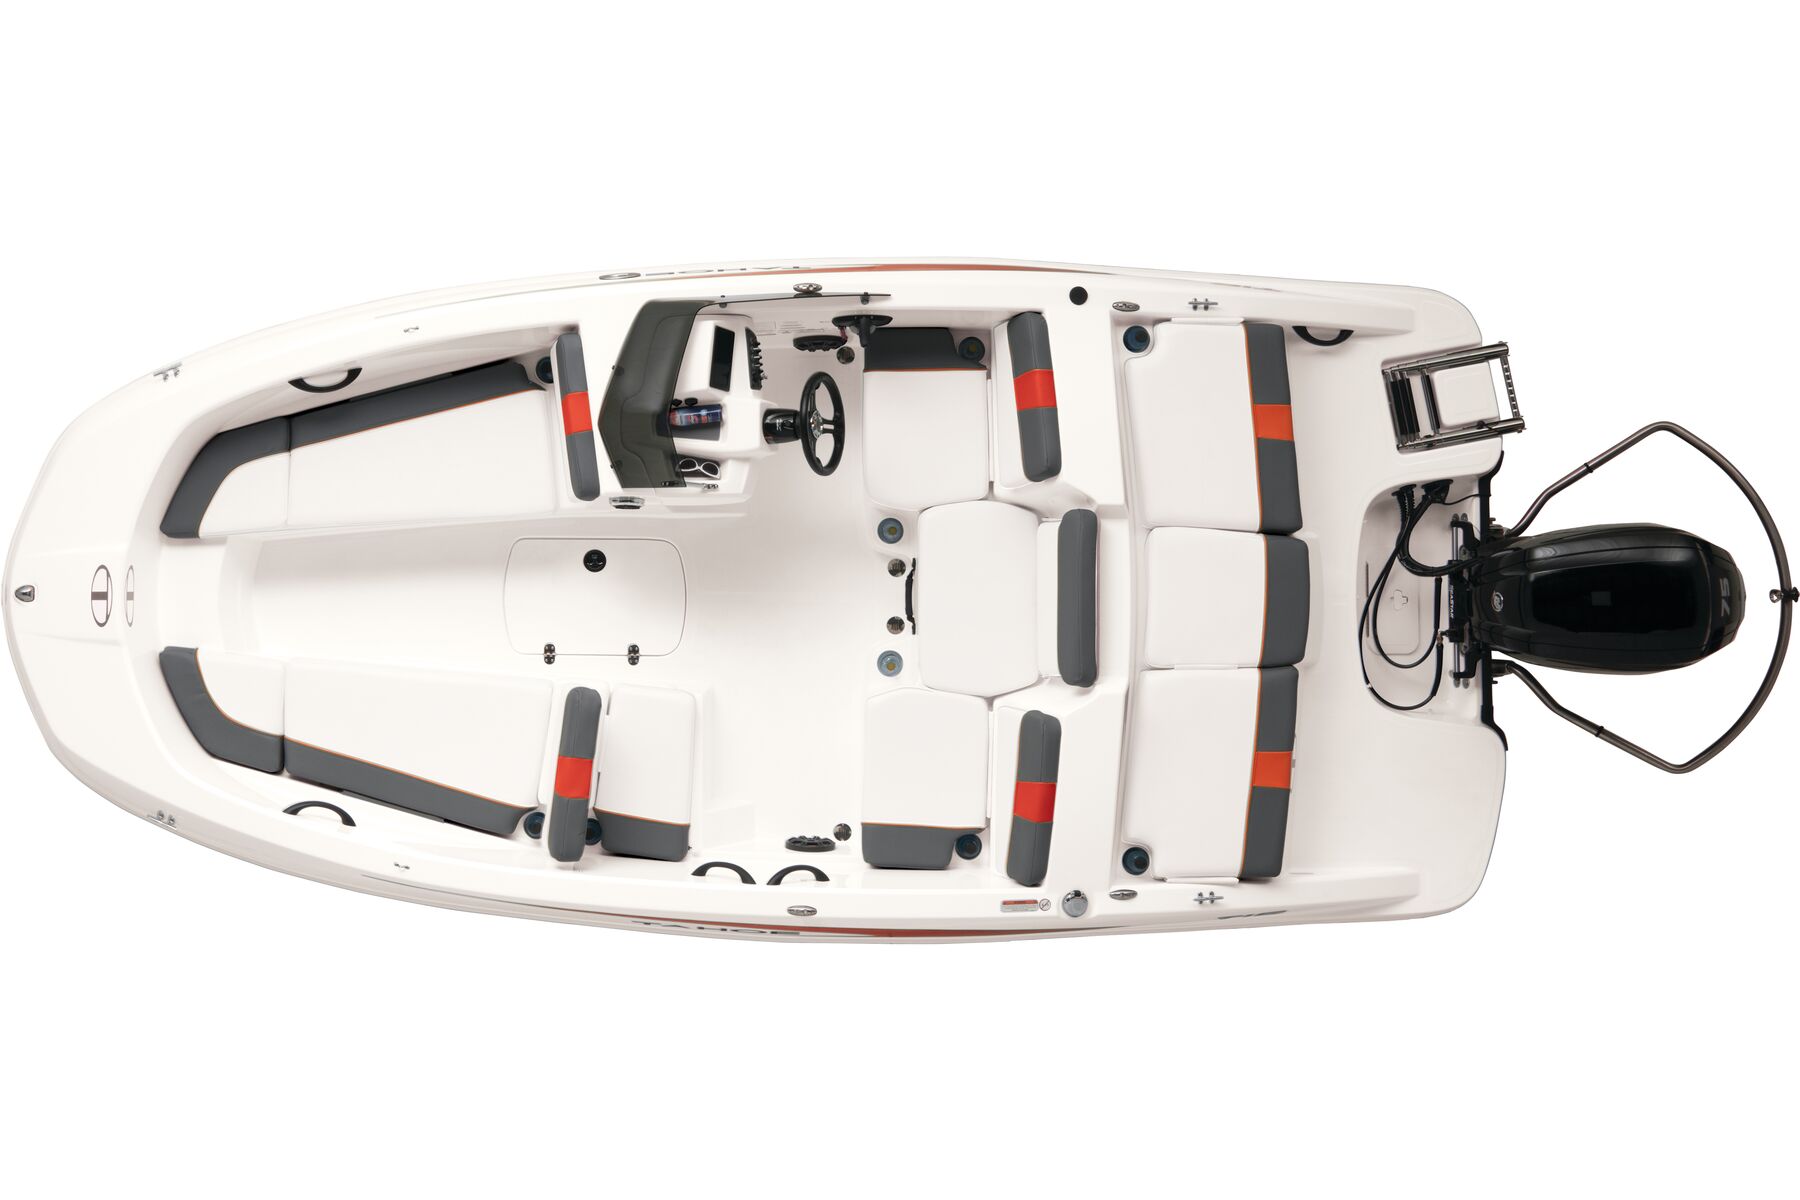 T16 - TAHOE Bowrider Runabout Boat